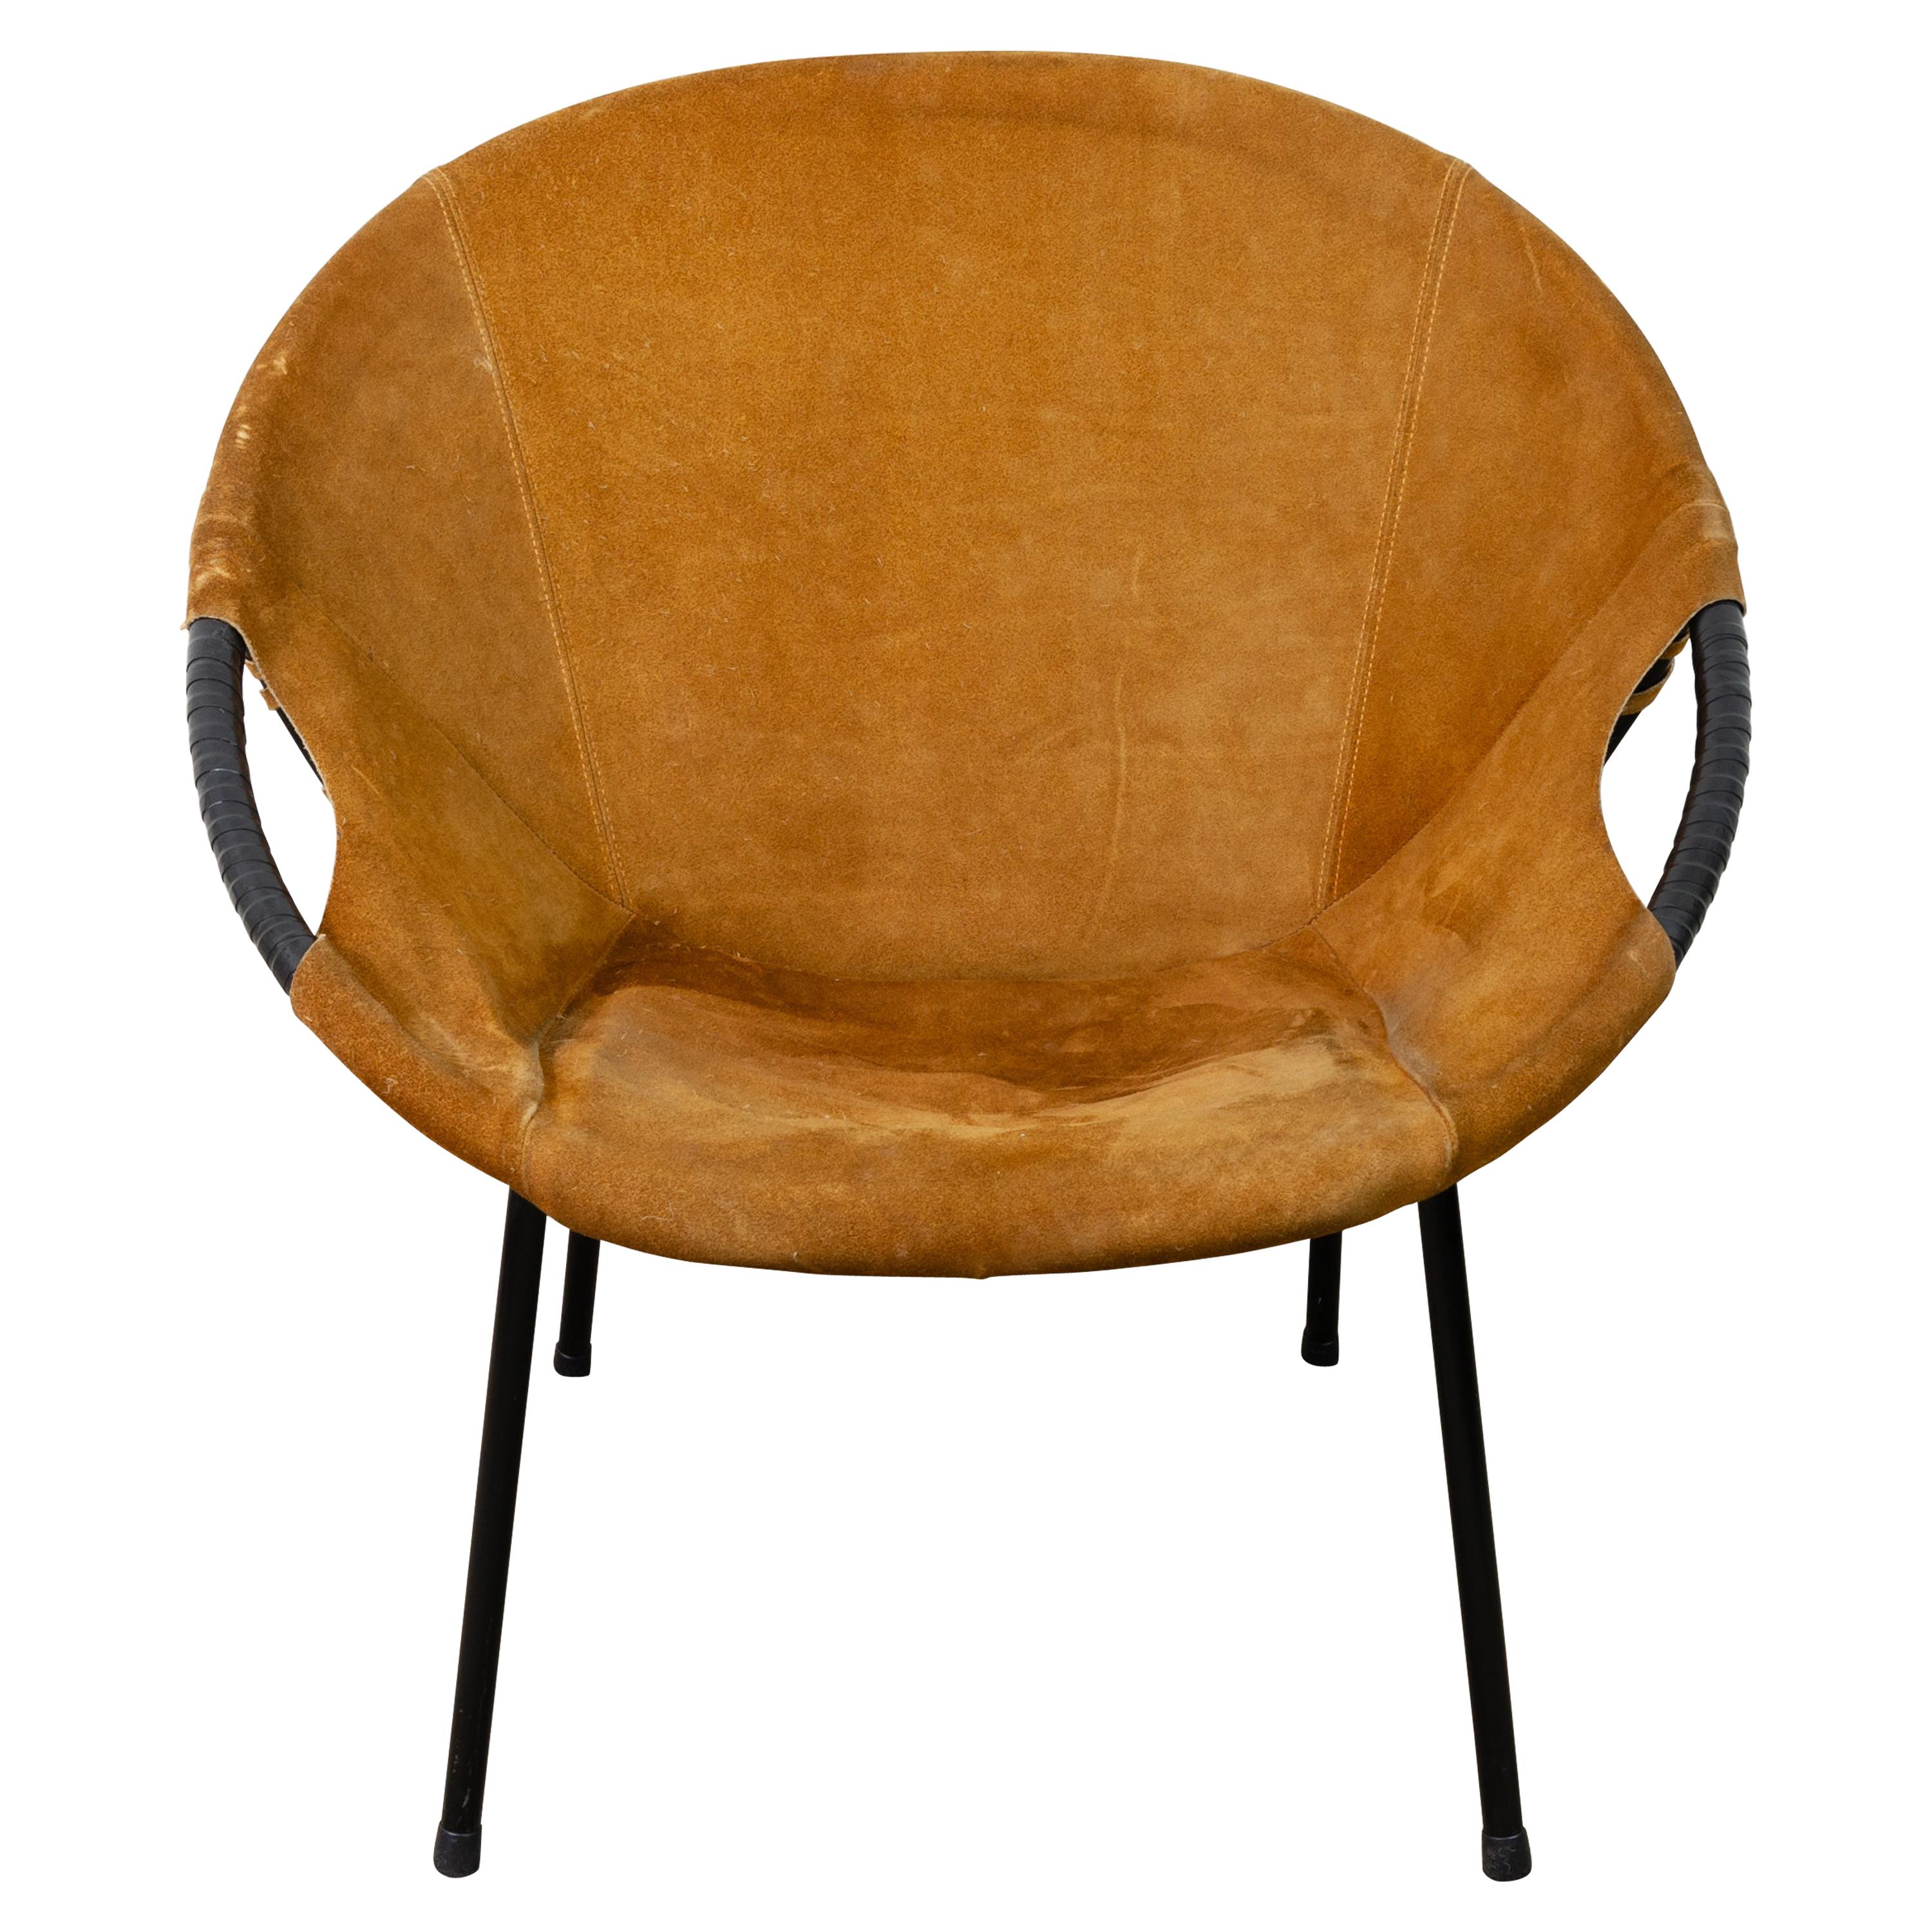 1960s Suede Circle Balloon Chair by Lusch Erzeugnis for Lusch & Co.